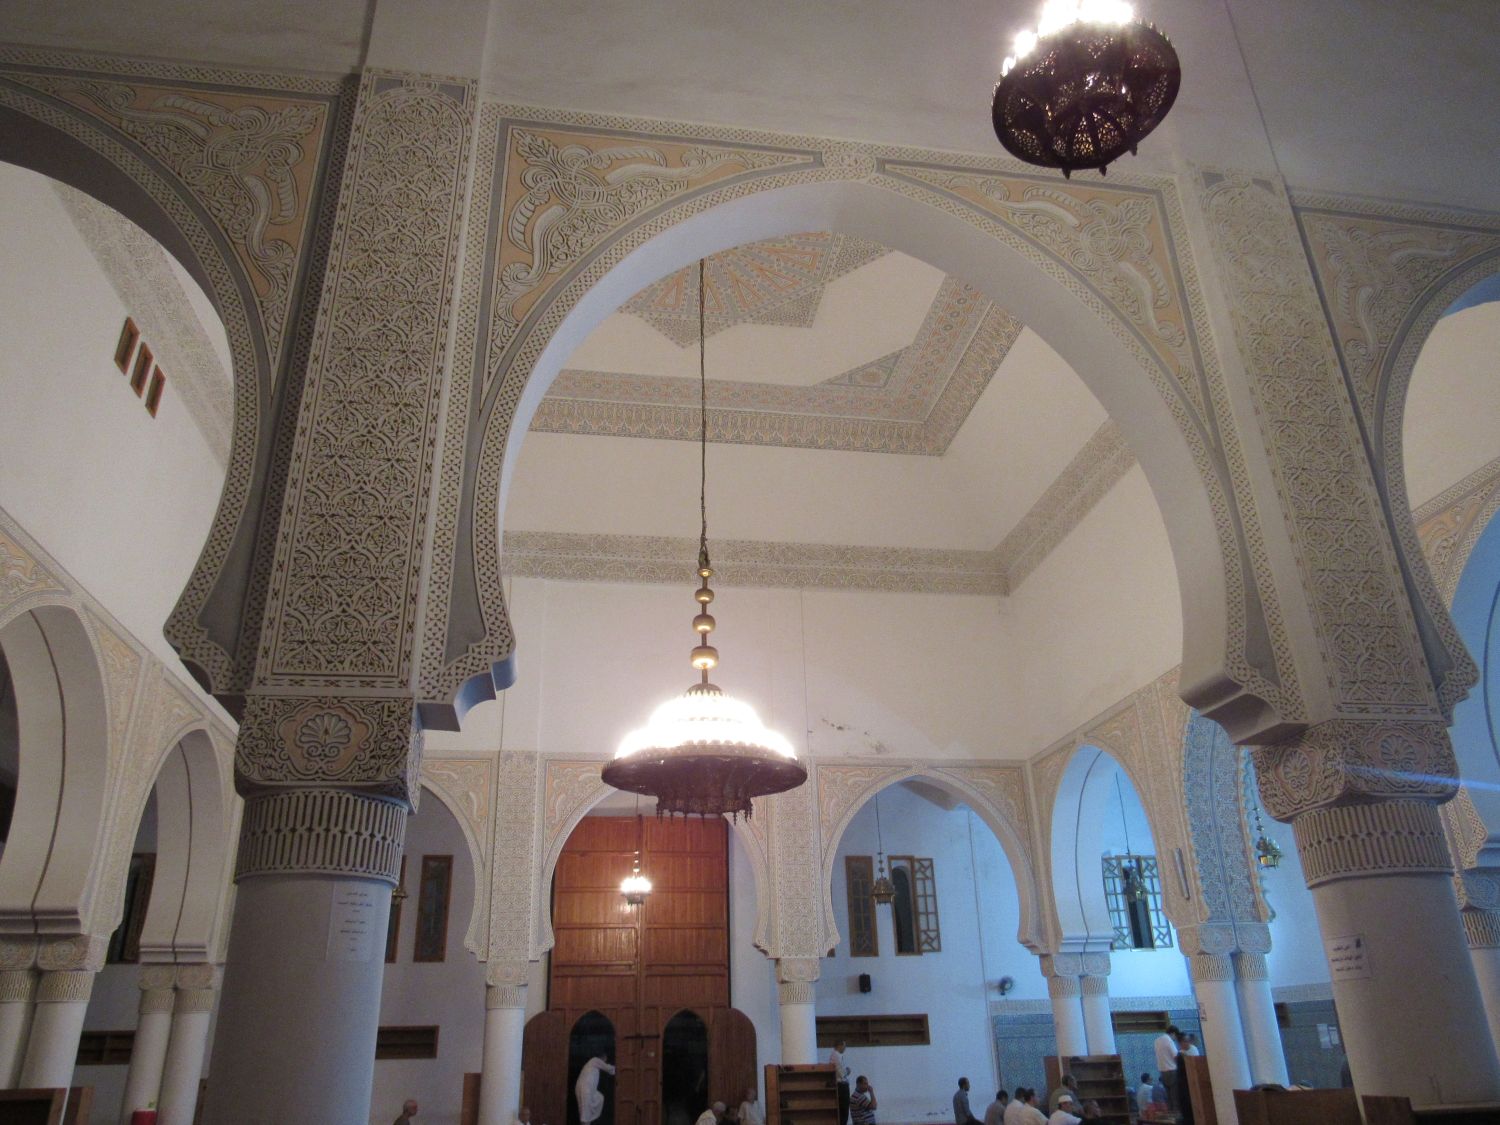 Interior view to the prayer hall ceiling